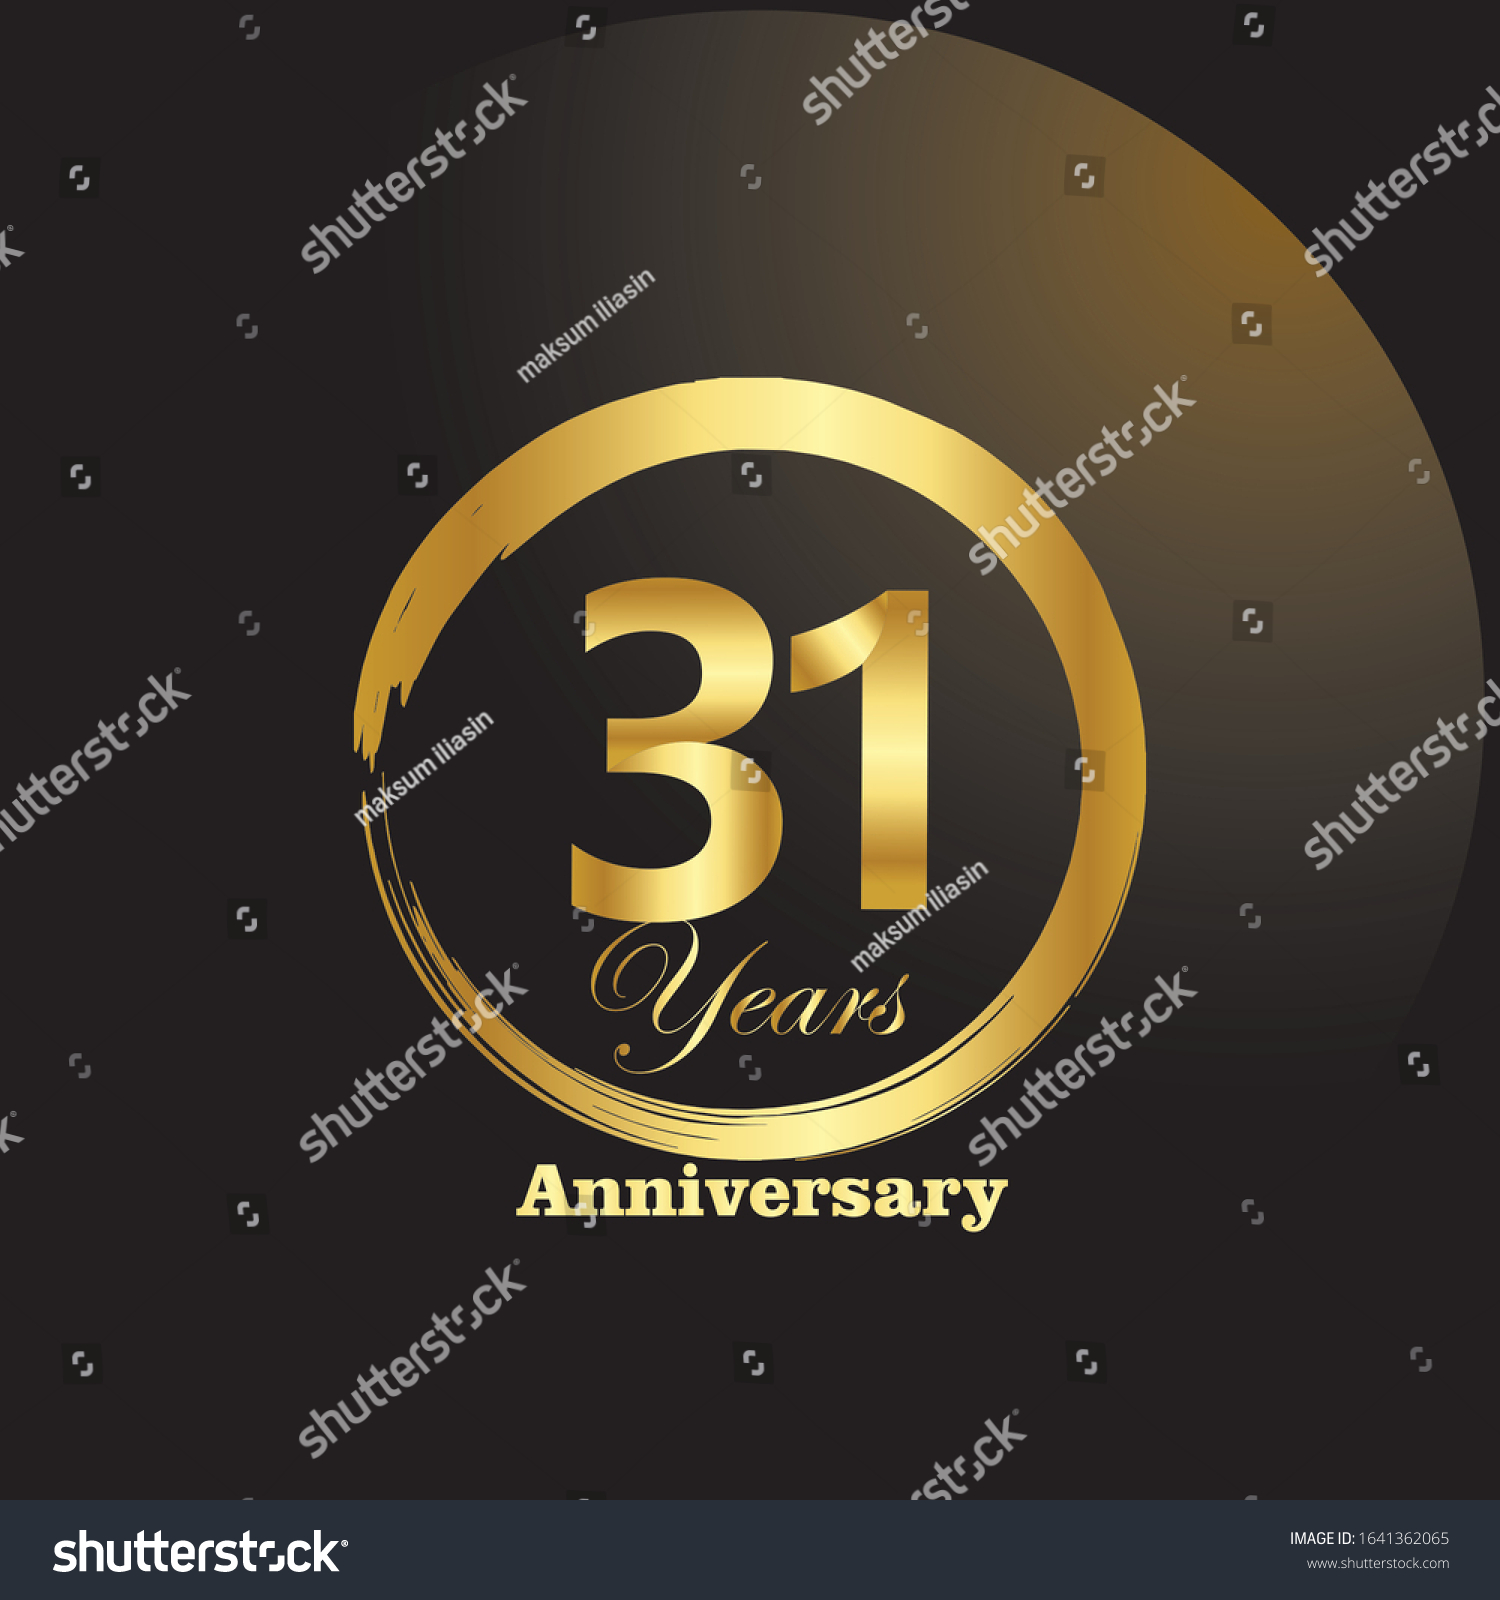 31 Year Anniversary Vector Template Design - Royalty Free Stock Vector ...